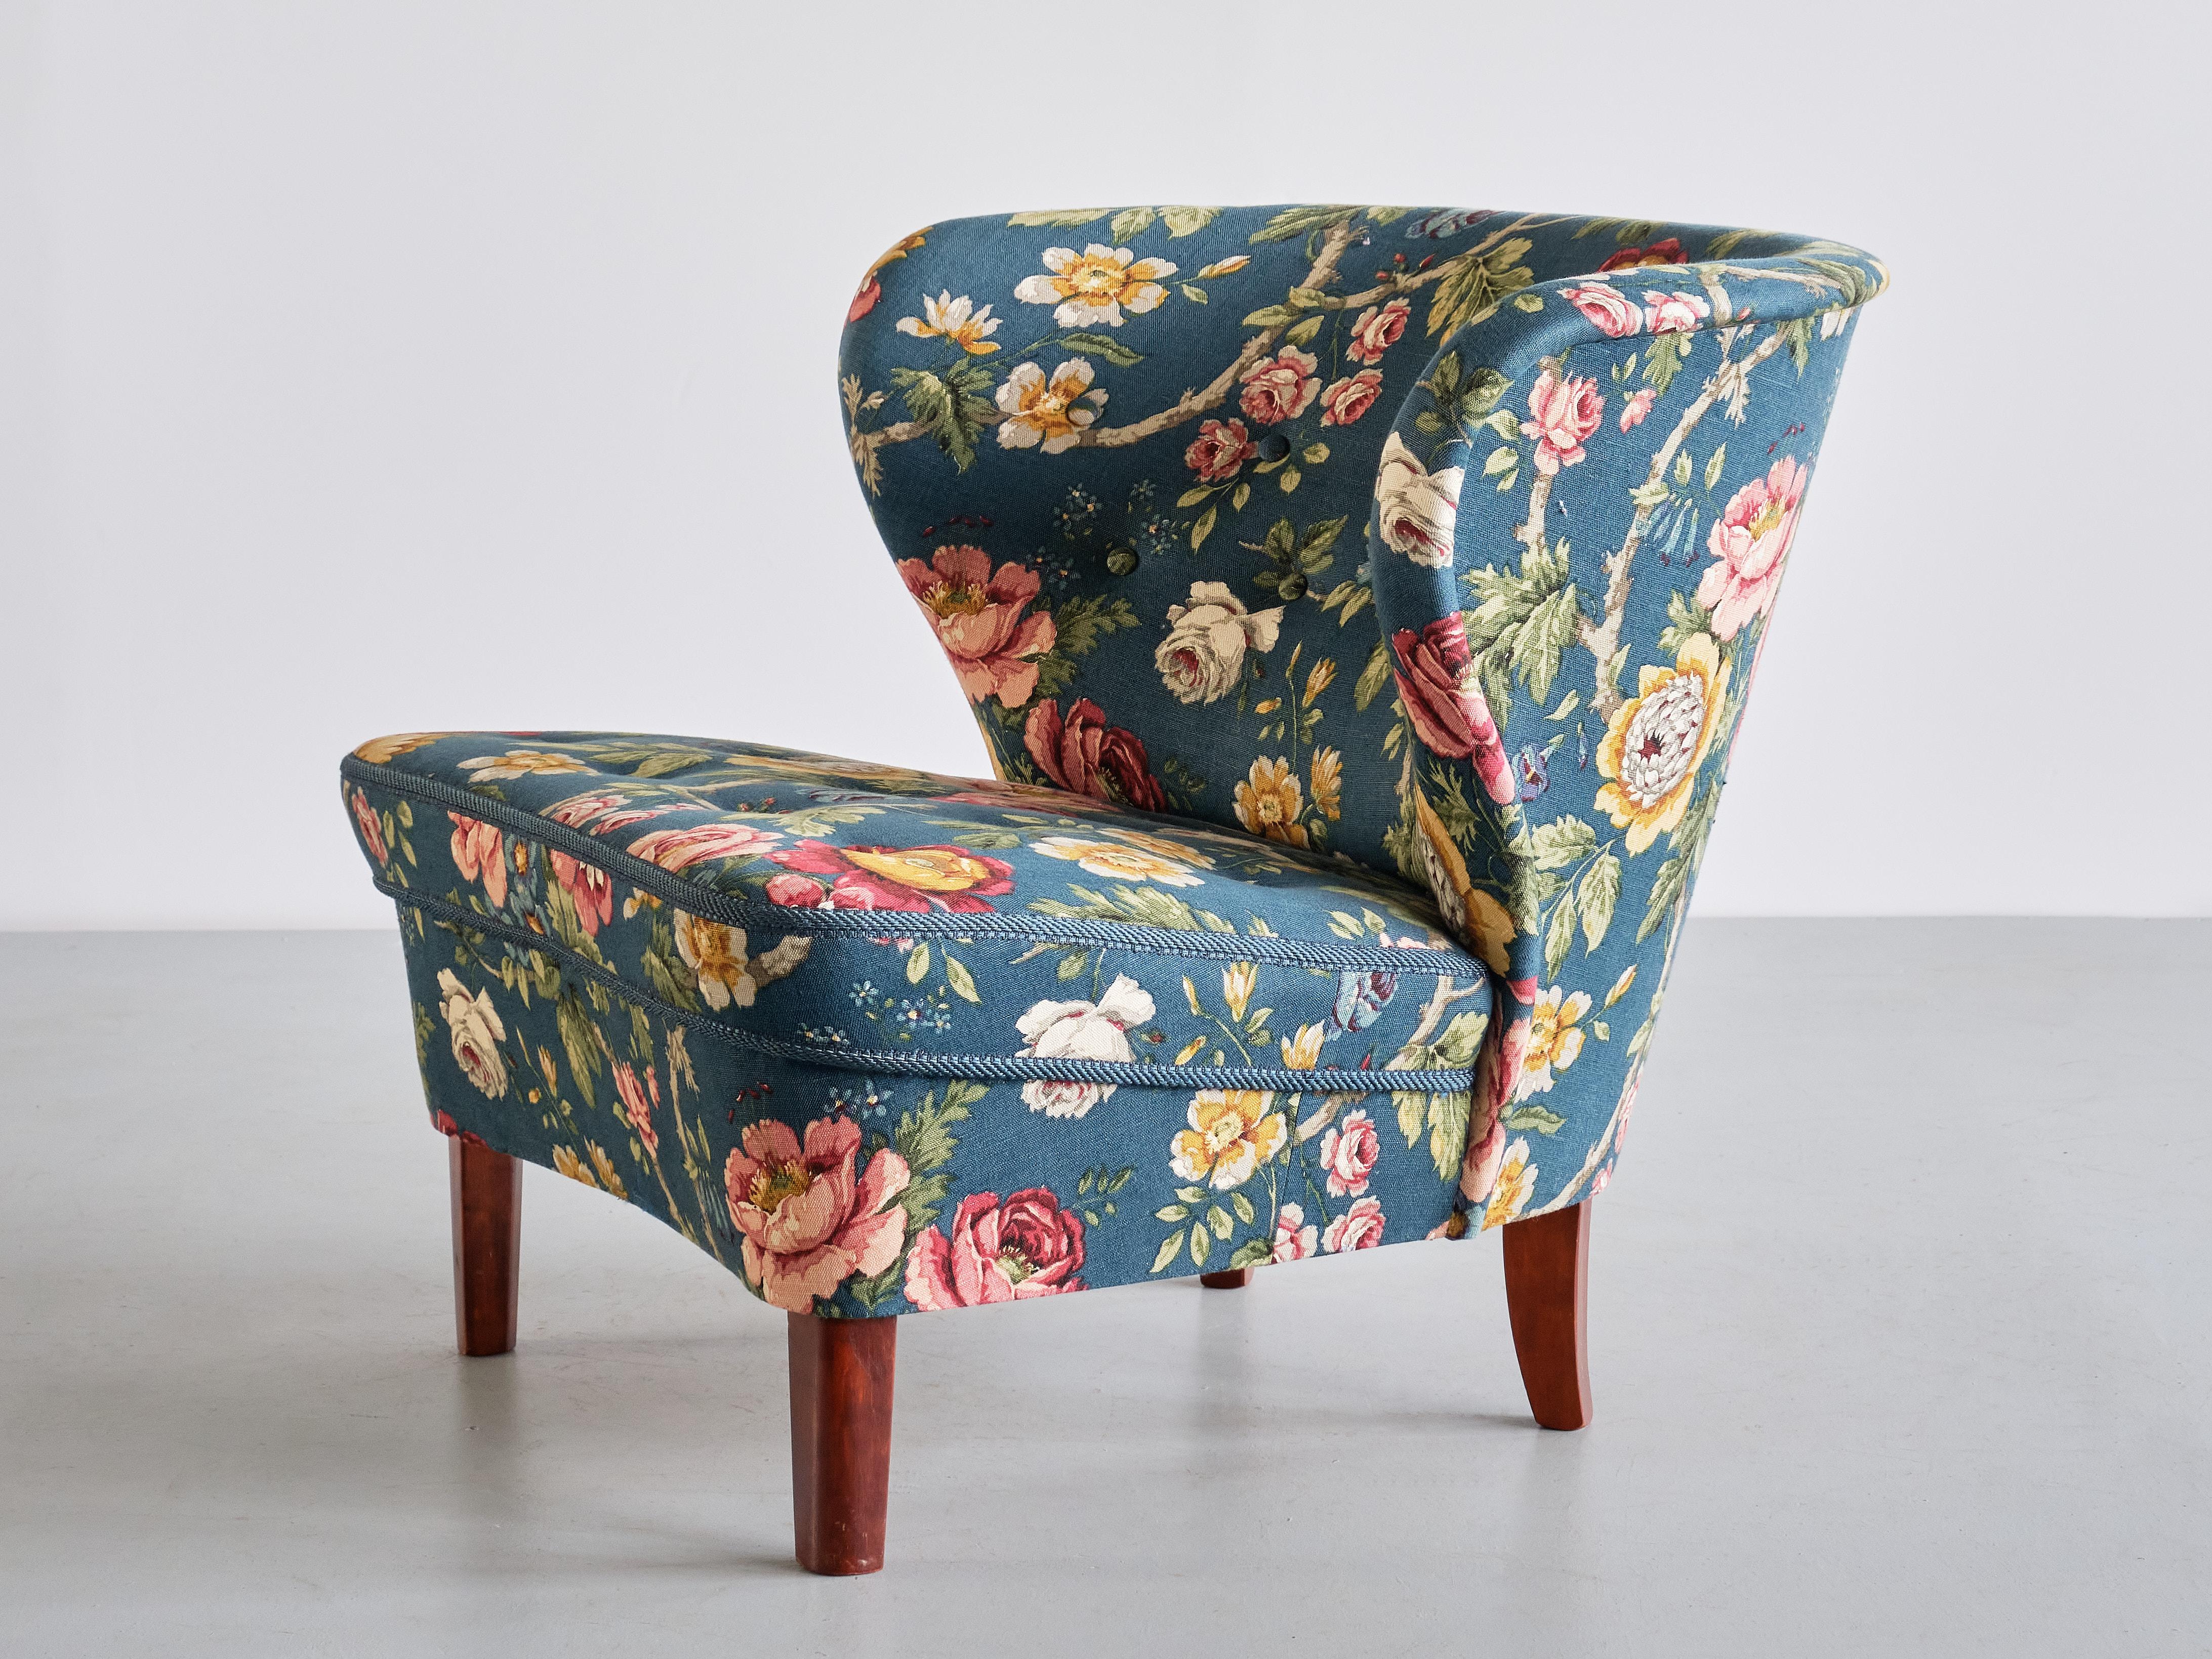 Gösta Jonsson Lounge Chair in Floral Fabric and Birch, Sweden, 1940s For Sale 6